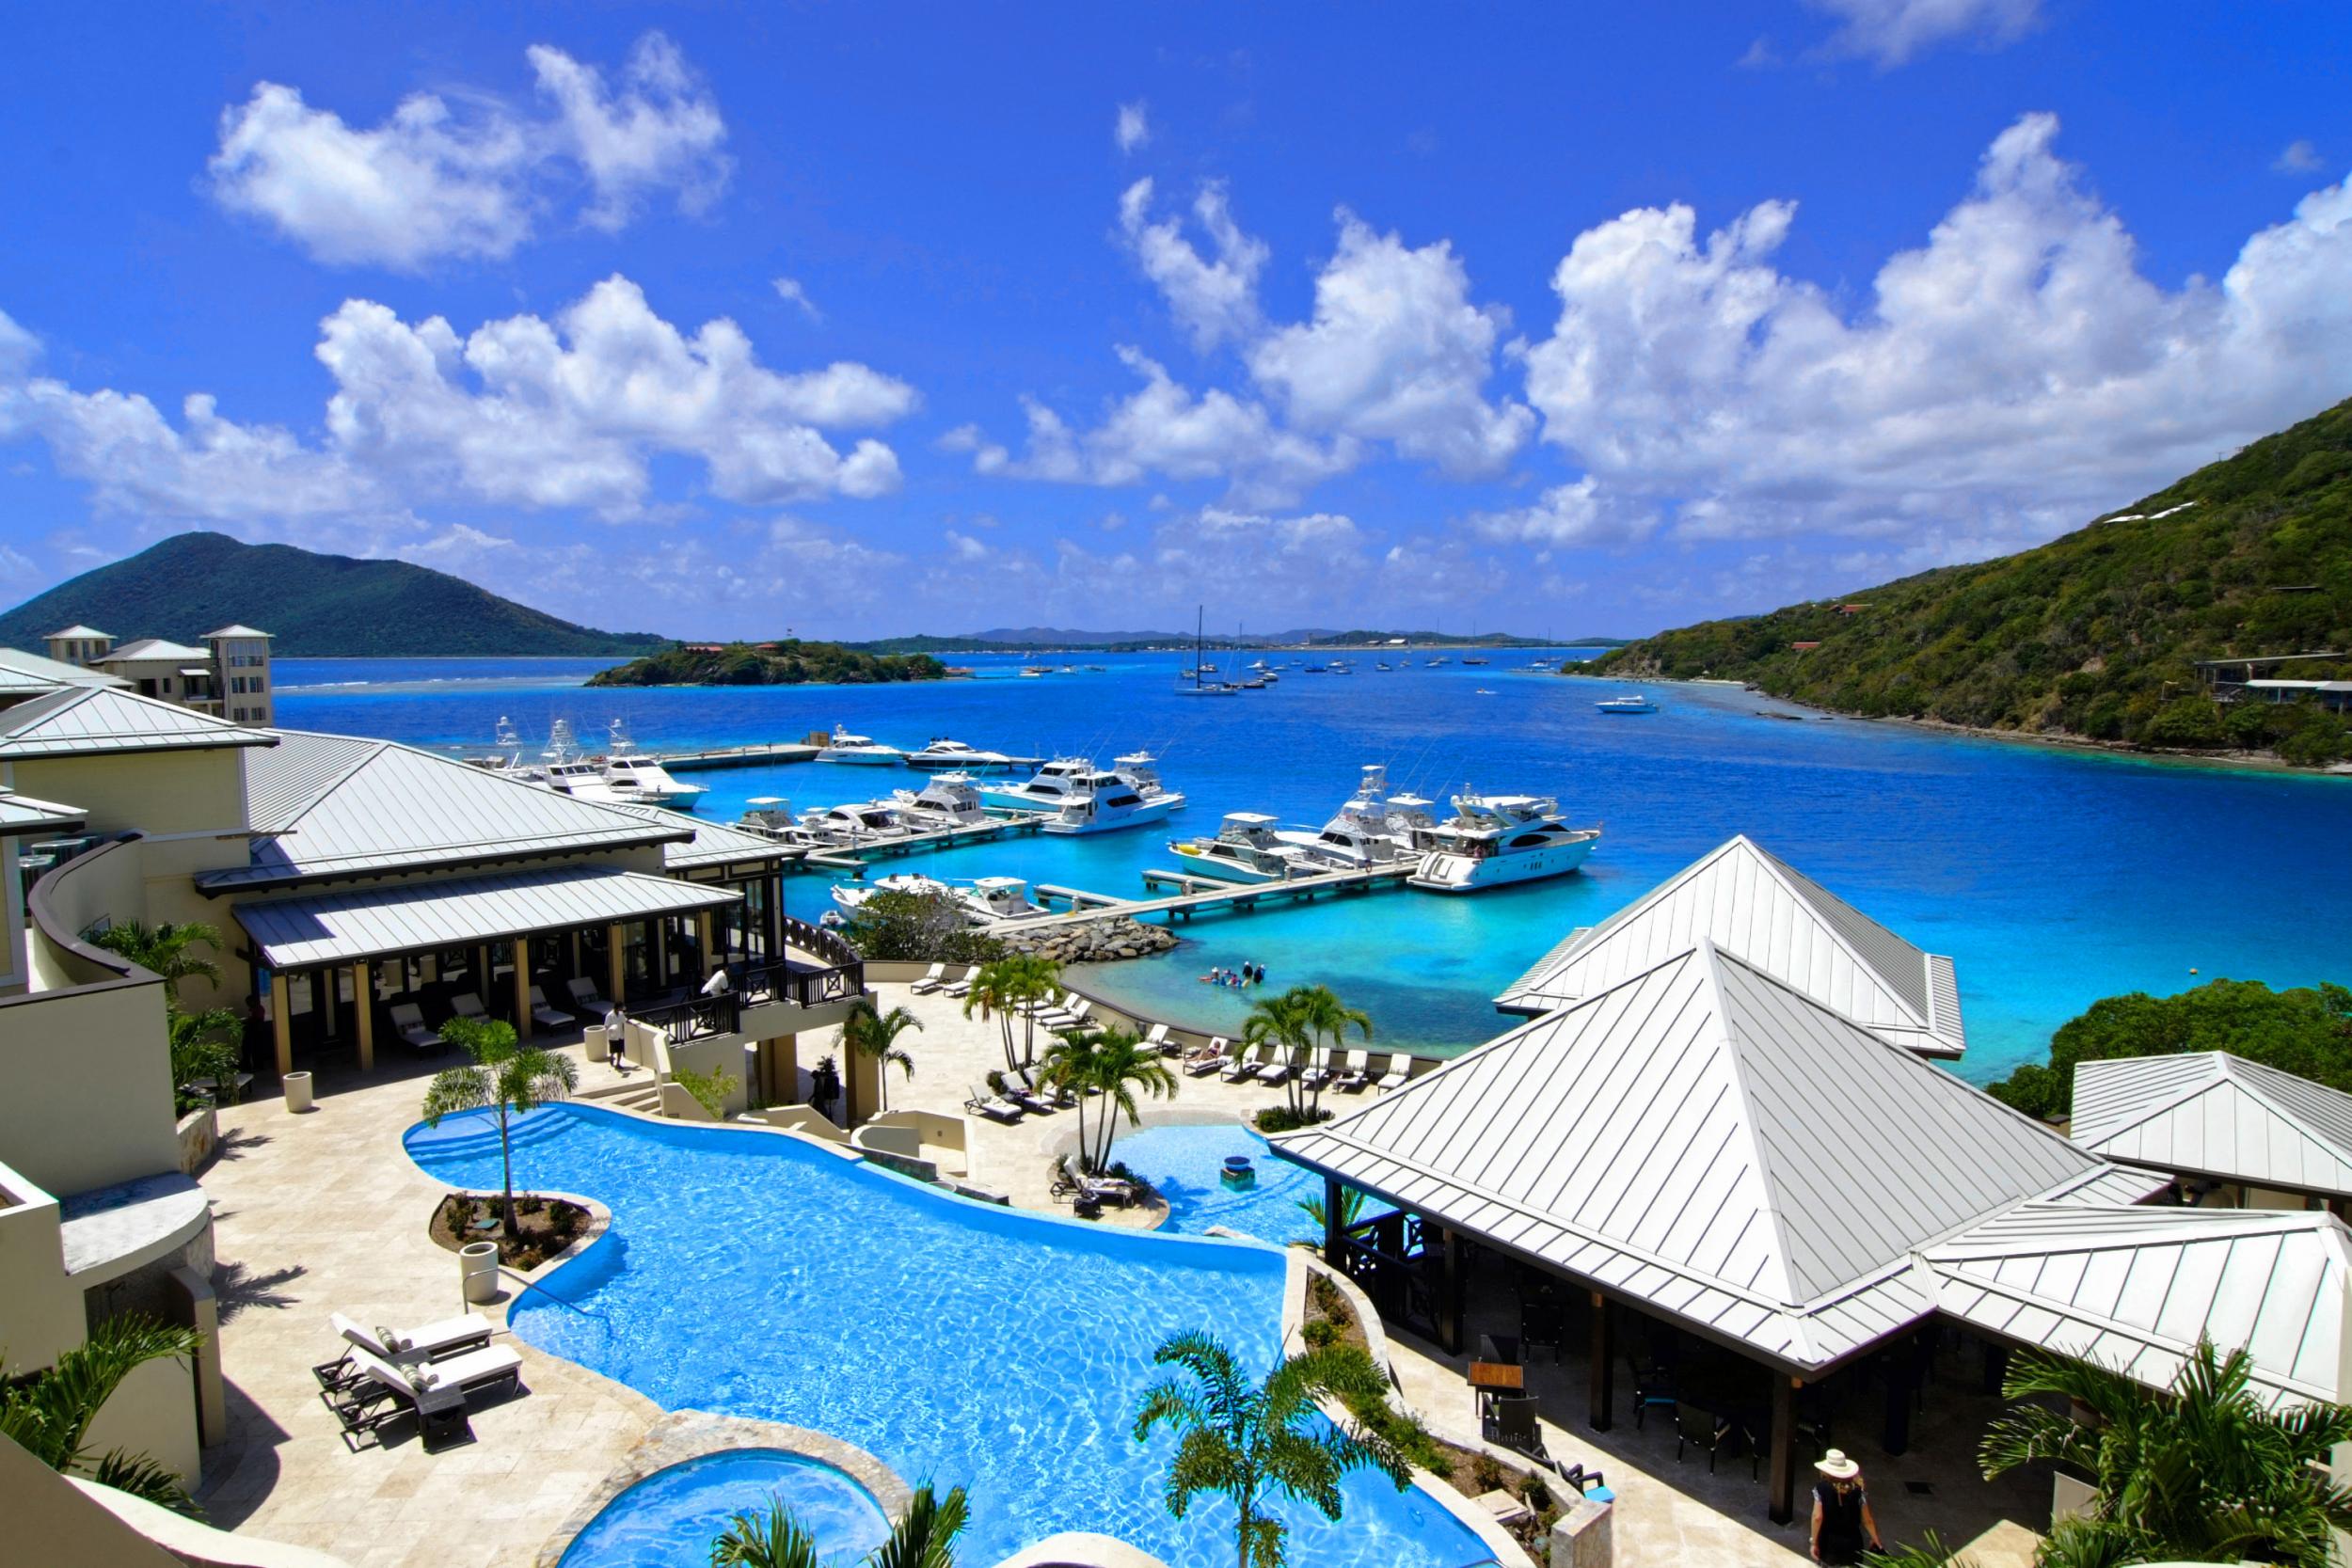 The British Virgin Islands are a noted tax haven, despite being under UK sovereignty